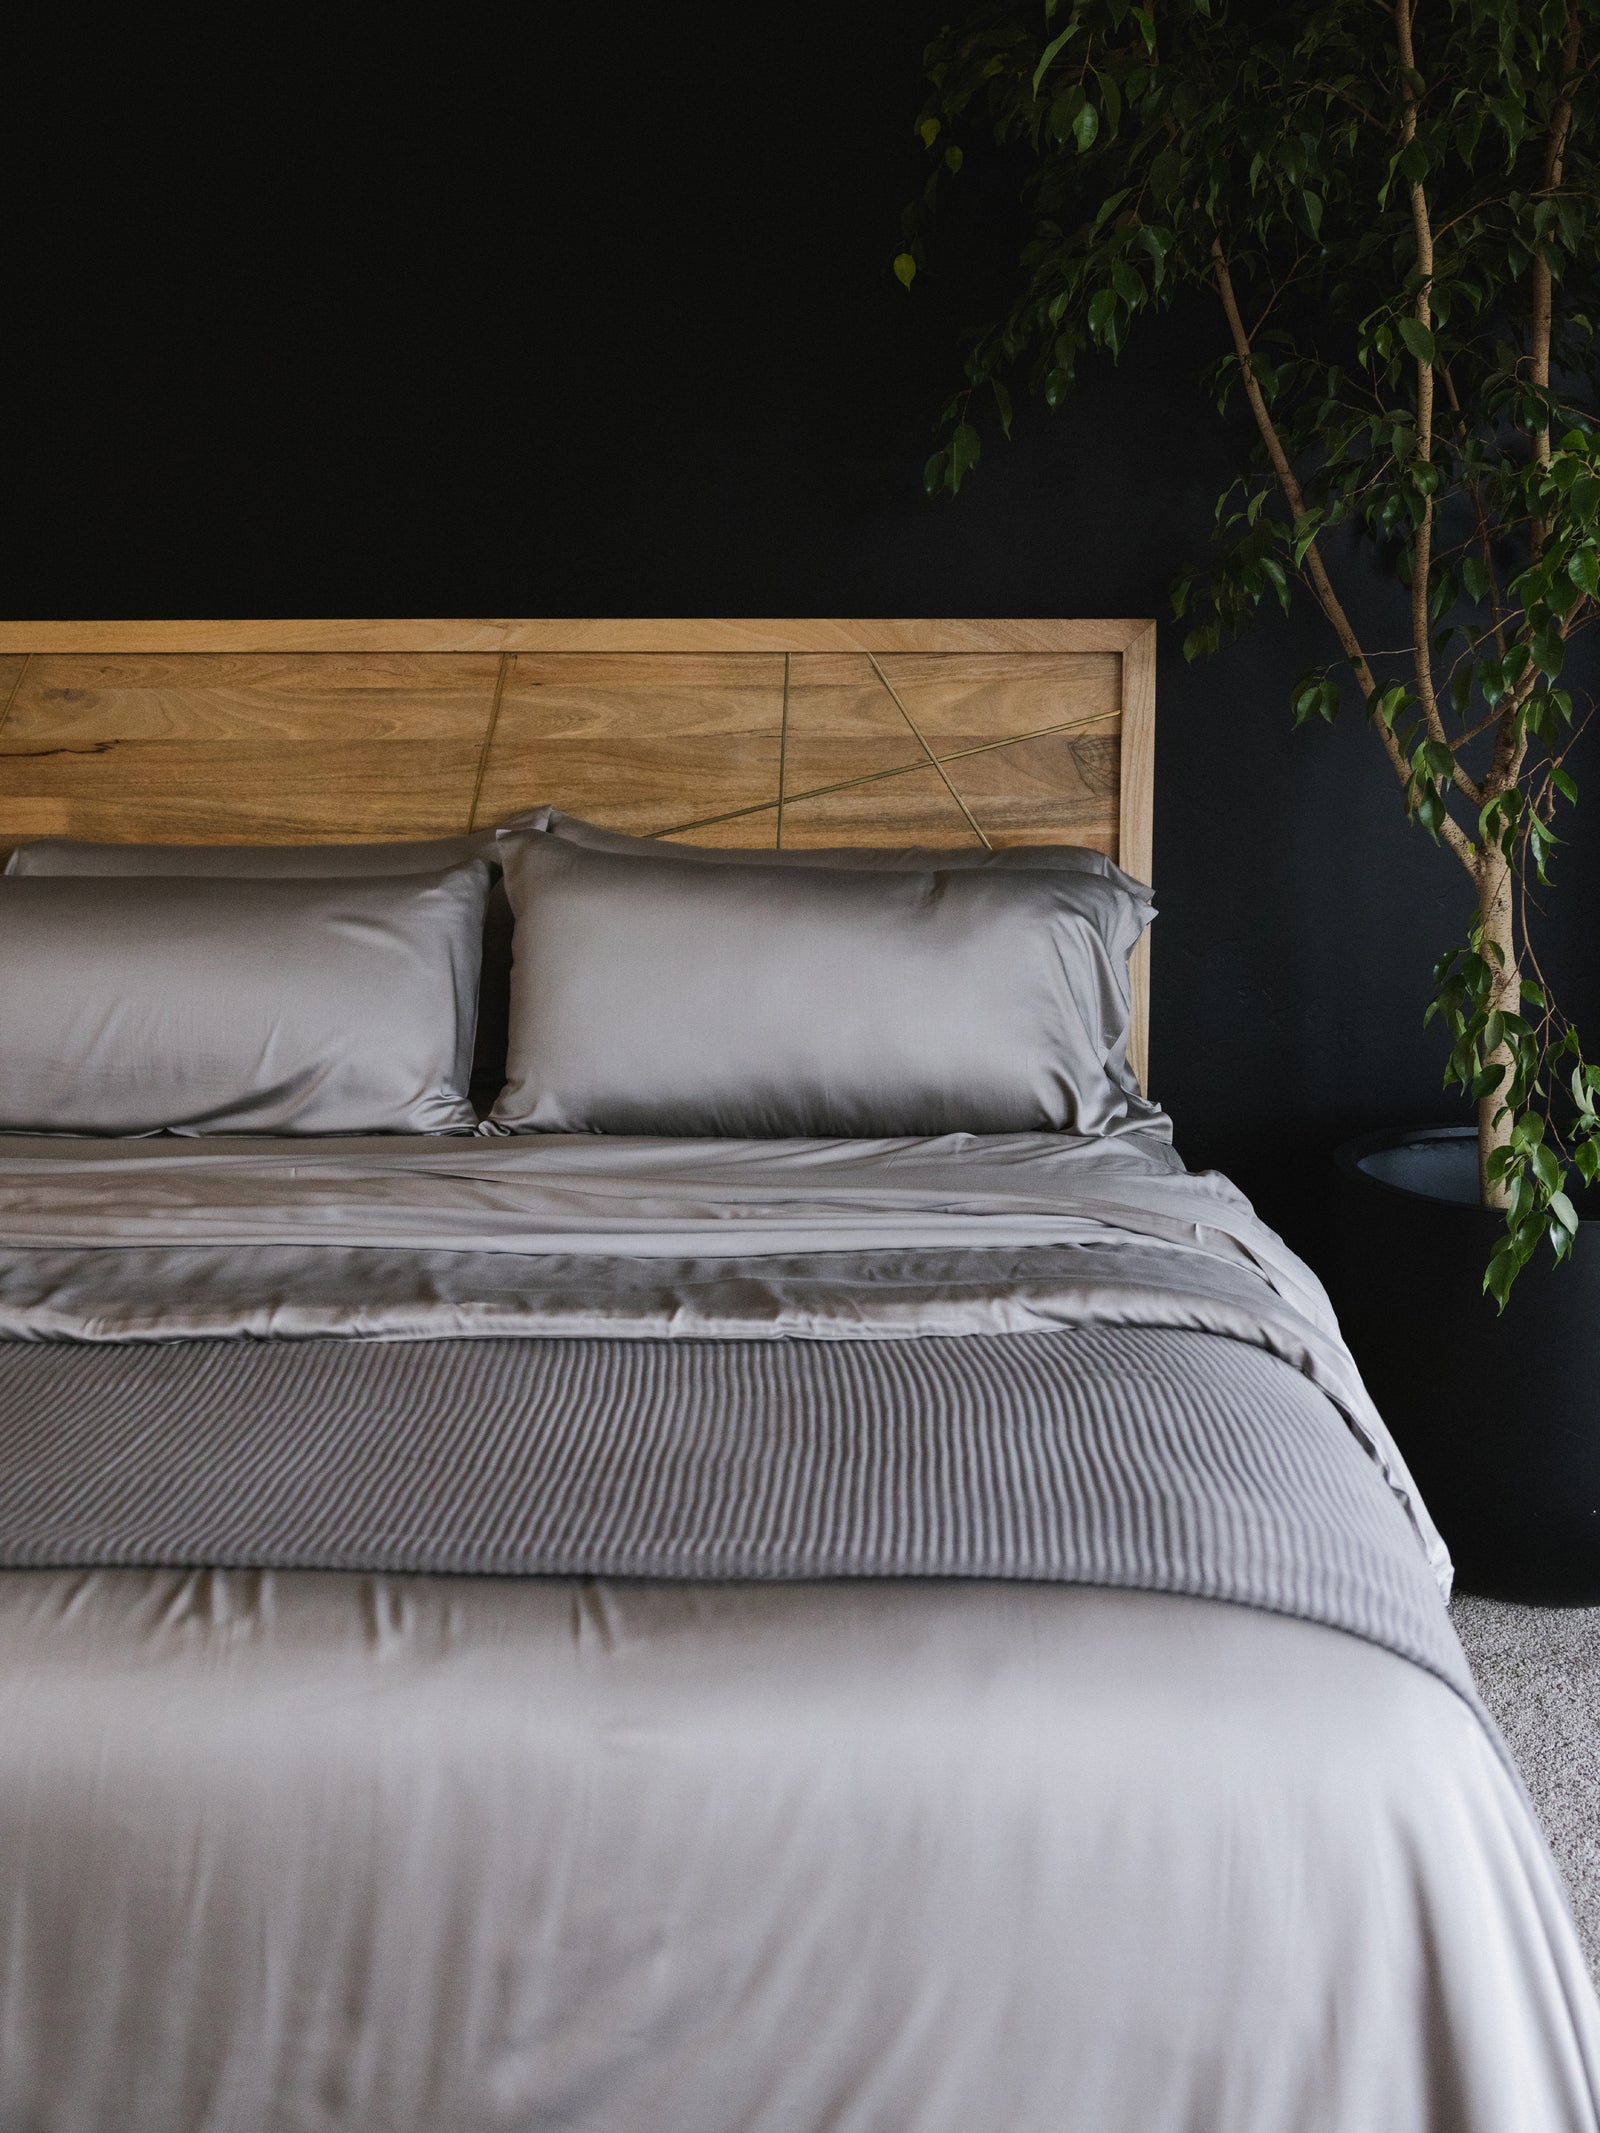 Bed made with dove grey bedding and a wooden headboard 